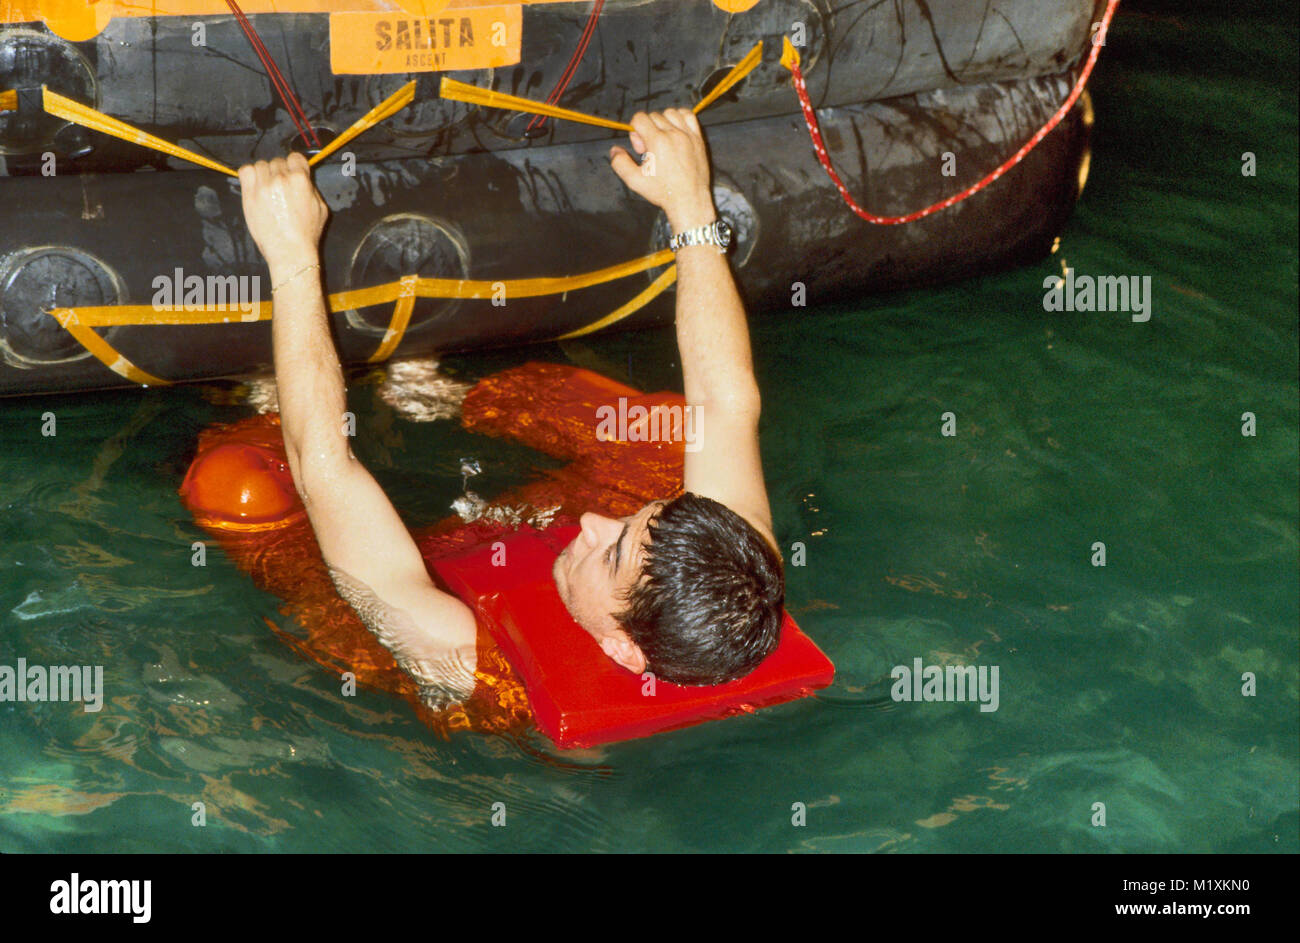 APT, fire and accident prevention school for personnel involved in  dangerous works, swimming pool exercise with life raft in the event of a  shipwreck (Bornasco, Pavia, Italy Stock Photo - Alamy